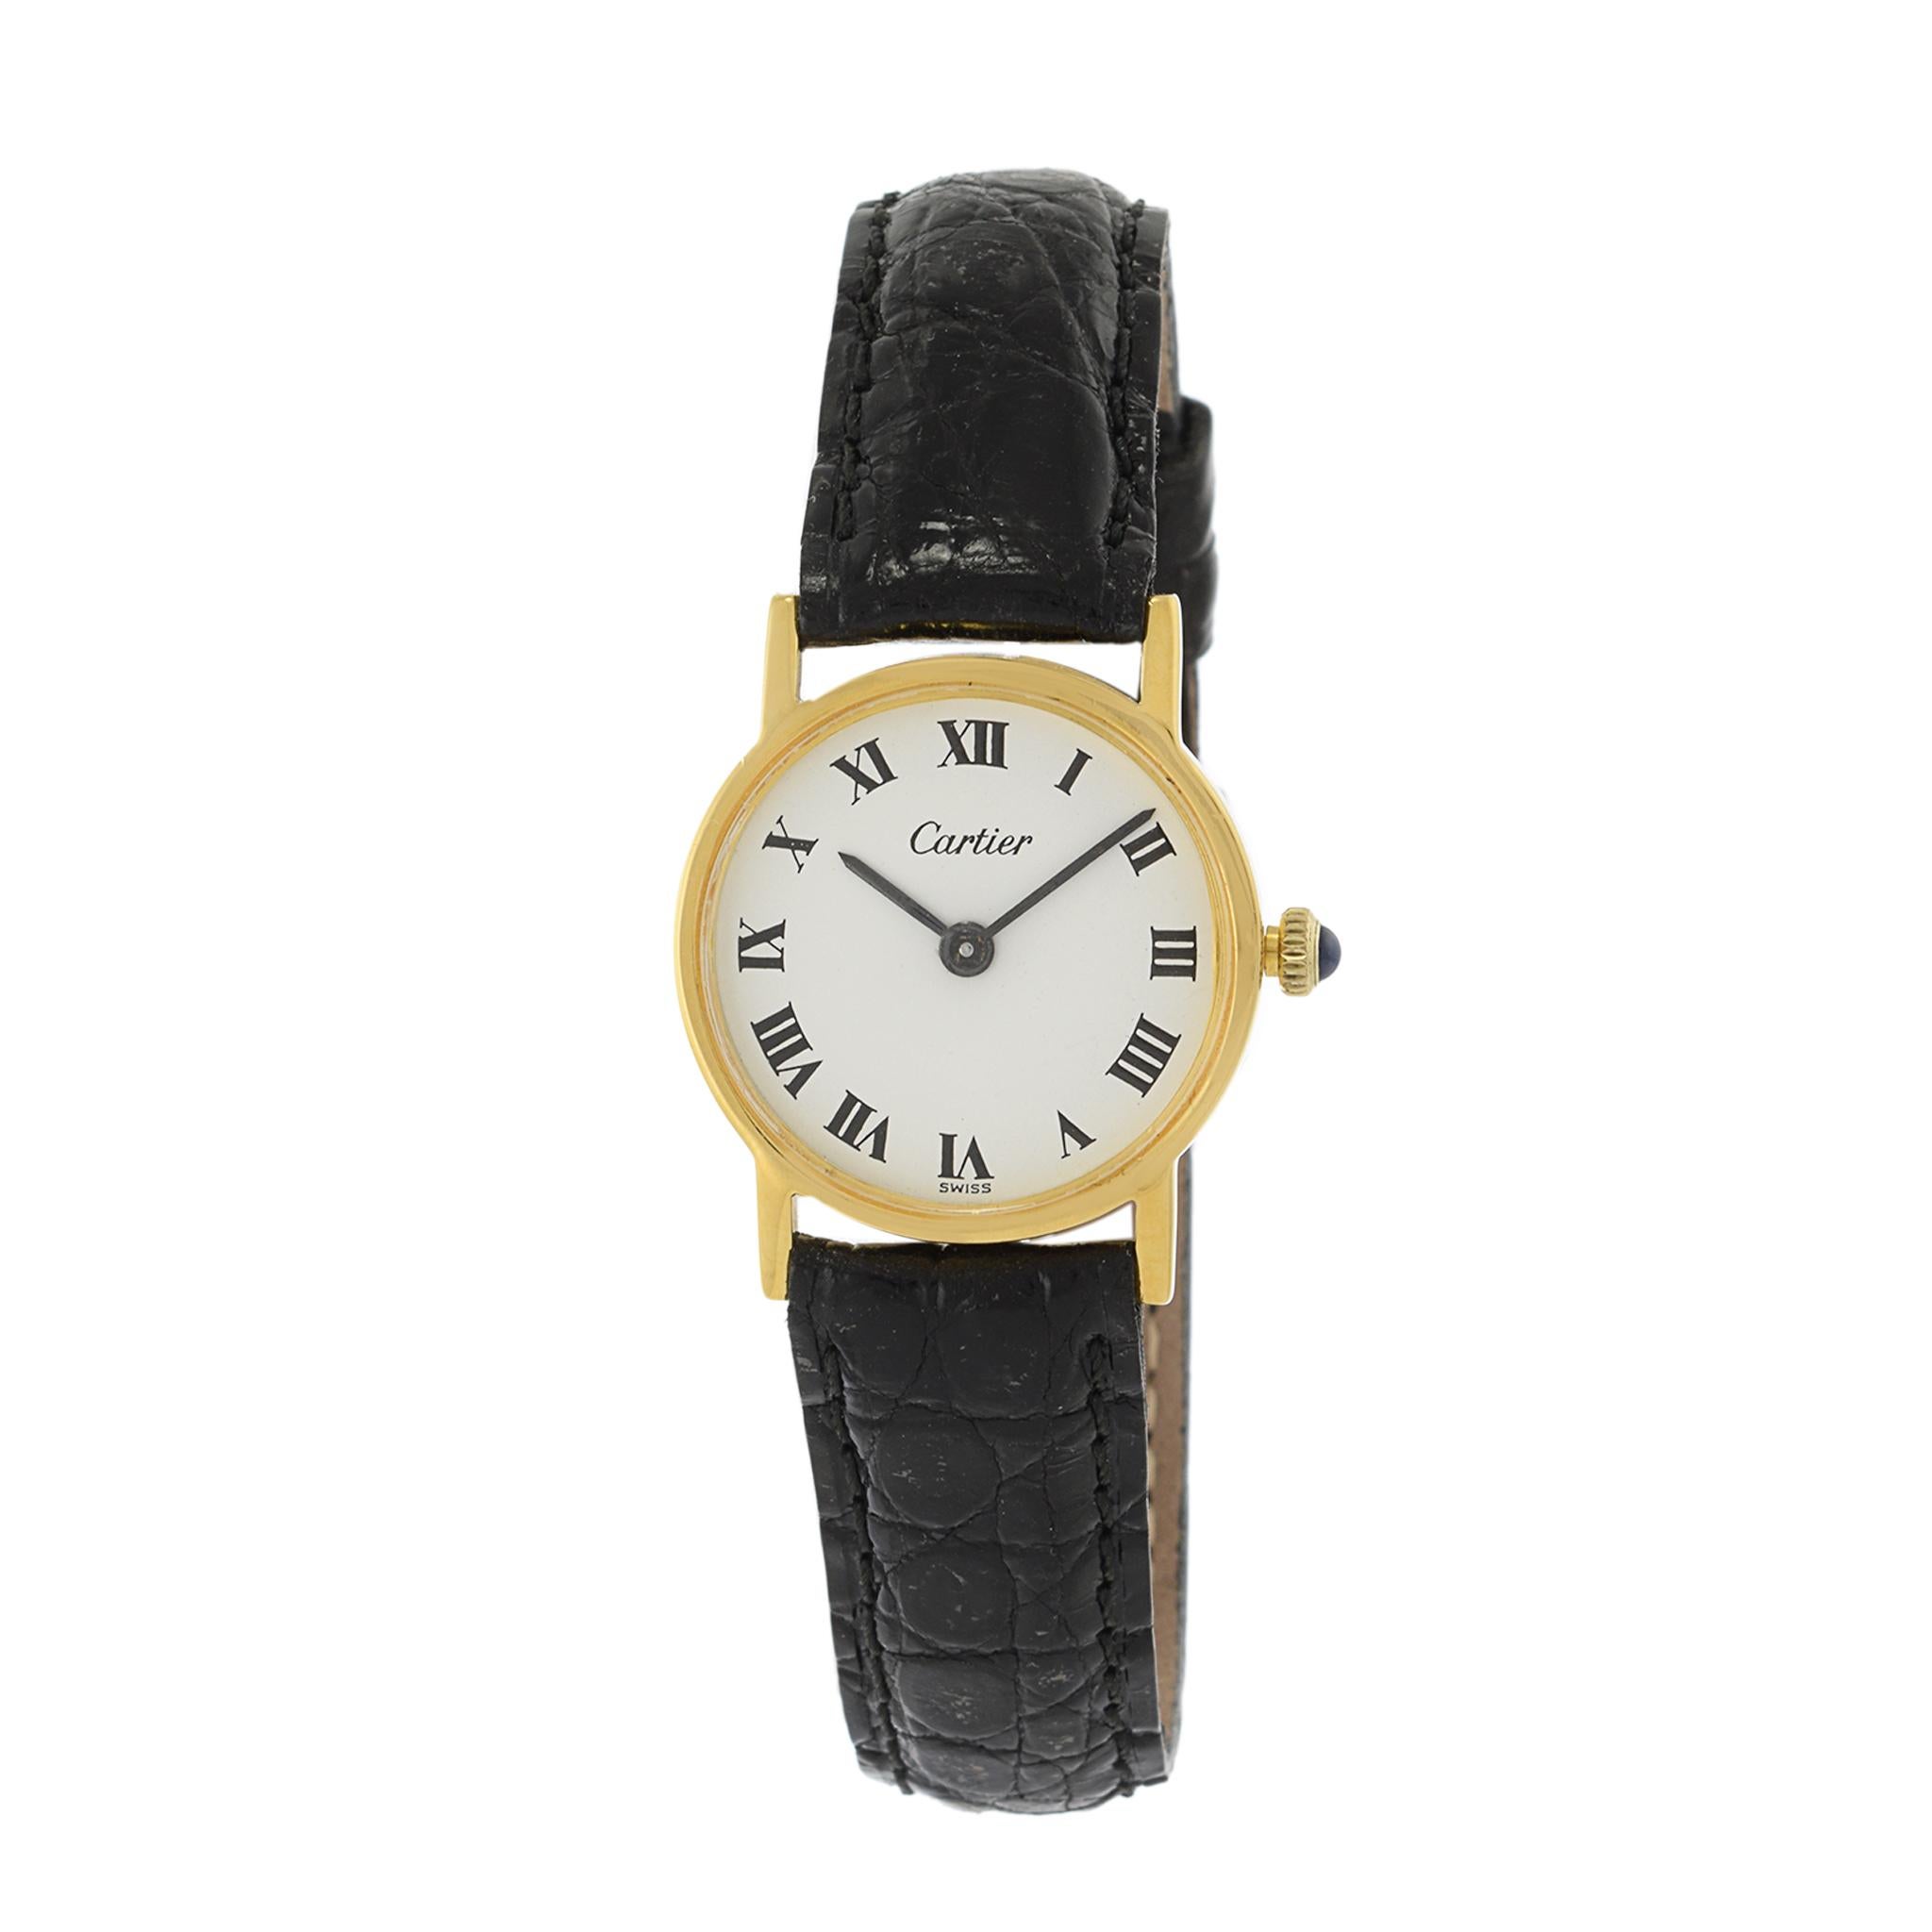 This is a 1980's Cartier Calatrava watch in vermeil. The case of this watch measures 24mm in diameter.

The watch is powered by a Cartier manual wind movement. It has been serviced.

The dial of the watch is white this black Roman numeral hour